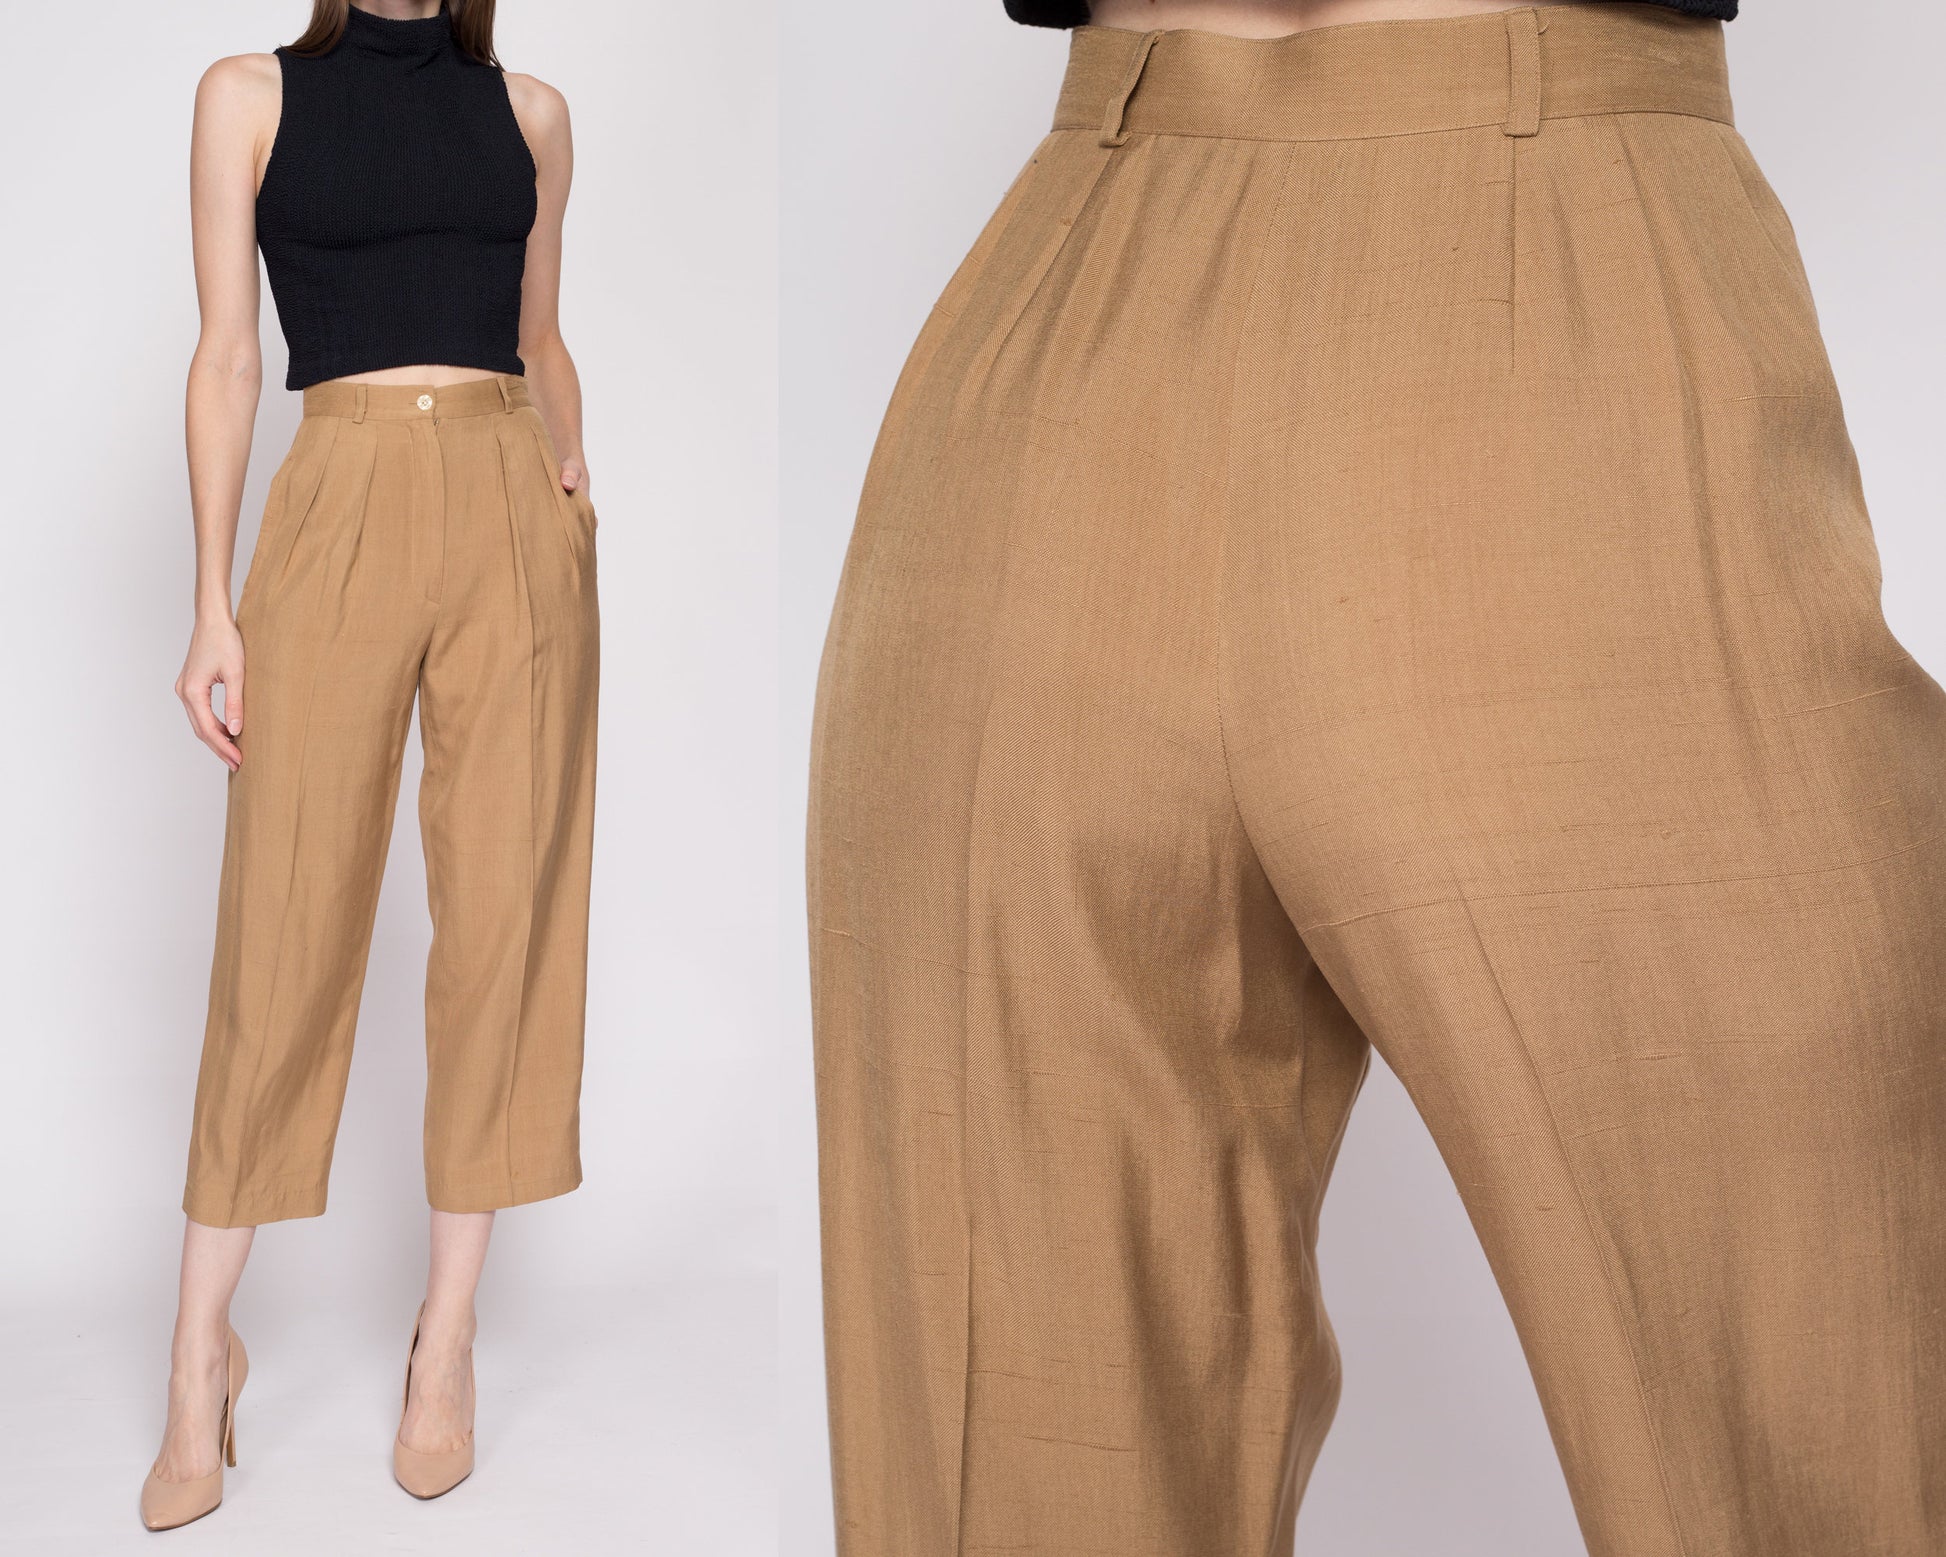 S| 90s Anne Klein Silk High Waisted Trousers - Petite Small, 25" | Vintage Minimalist Tan Pleated Tapered Leg Short Inseam Pants